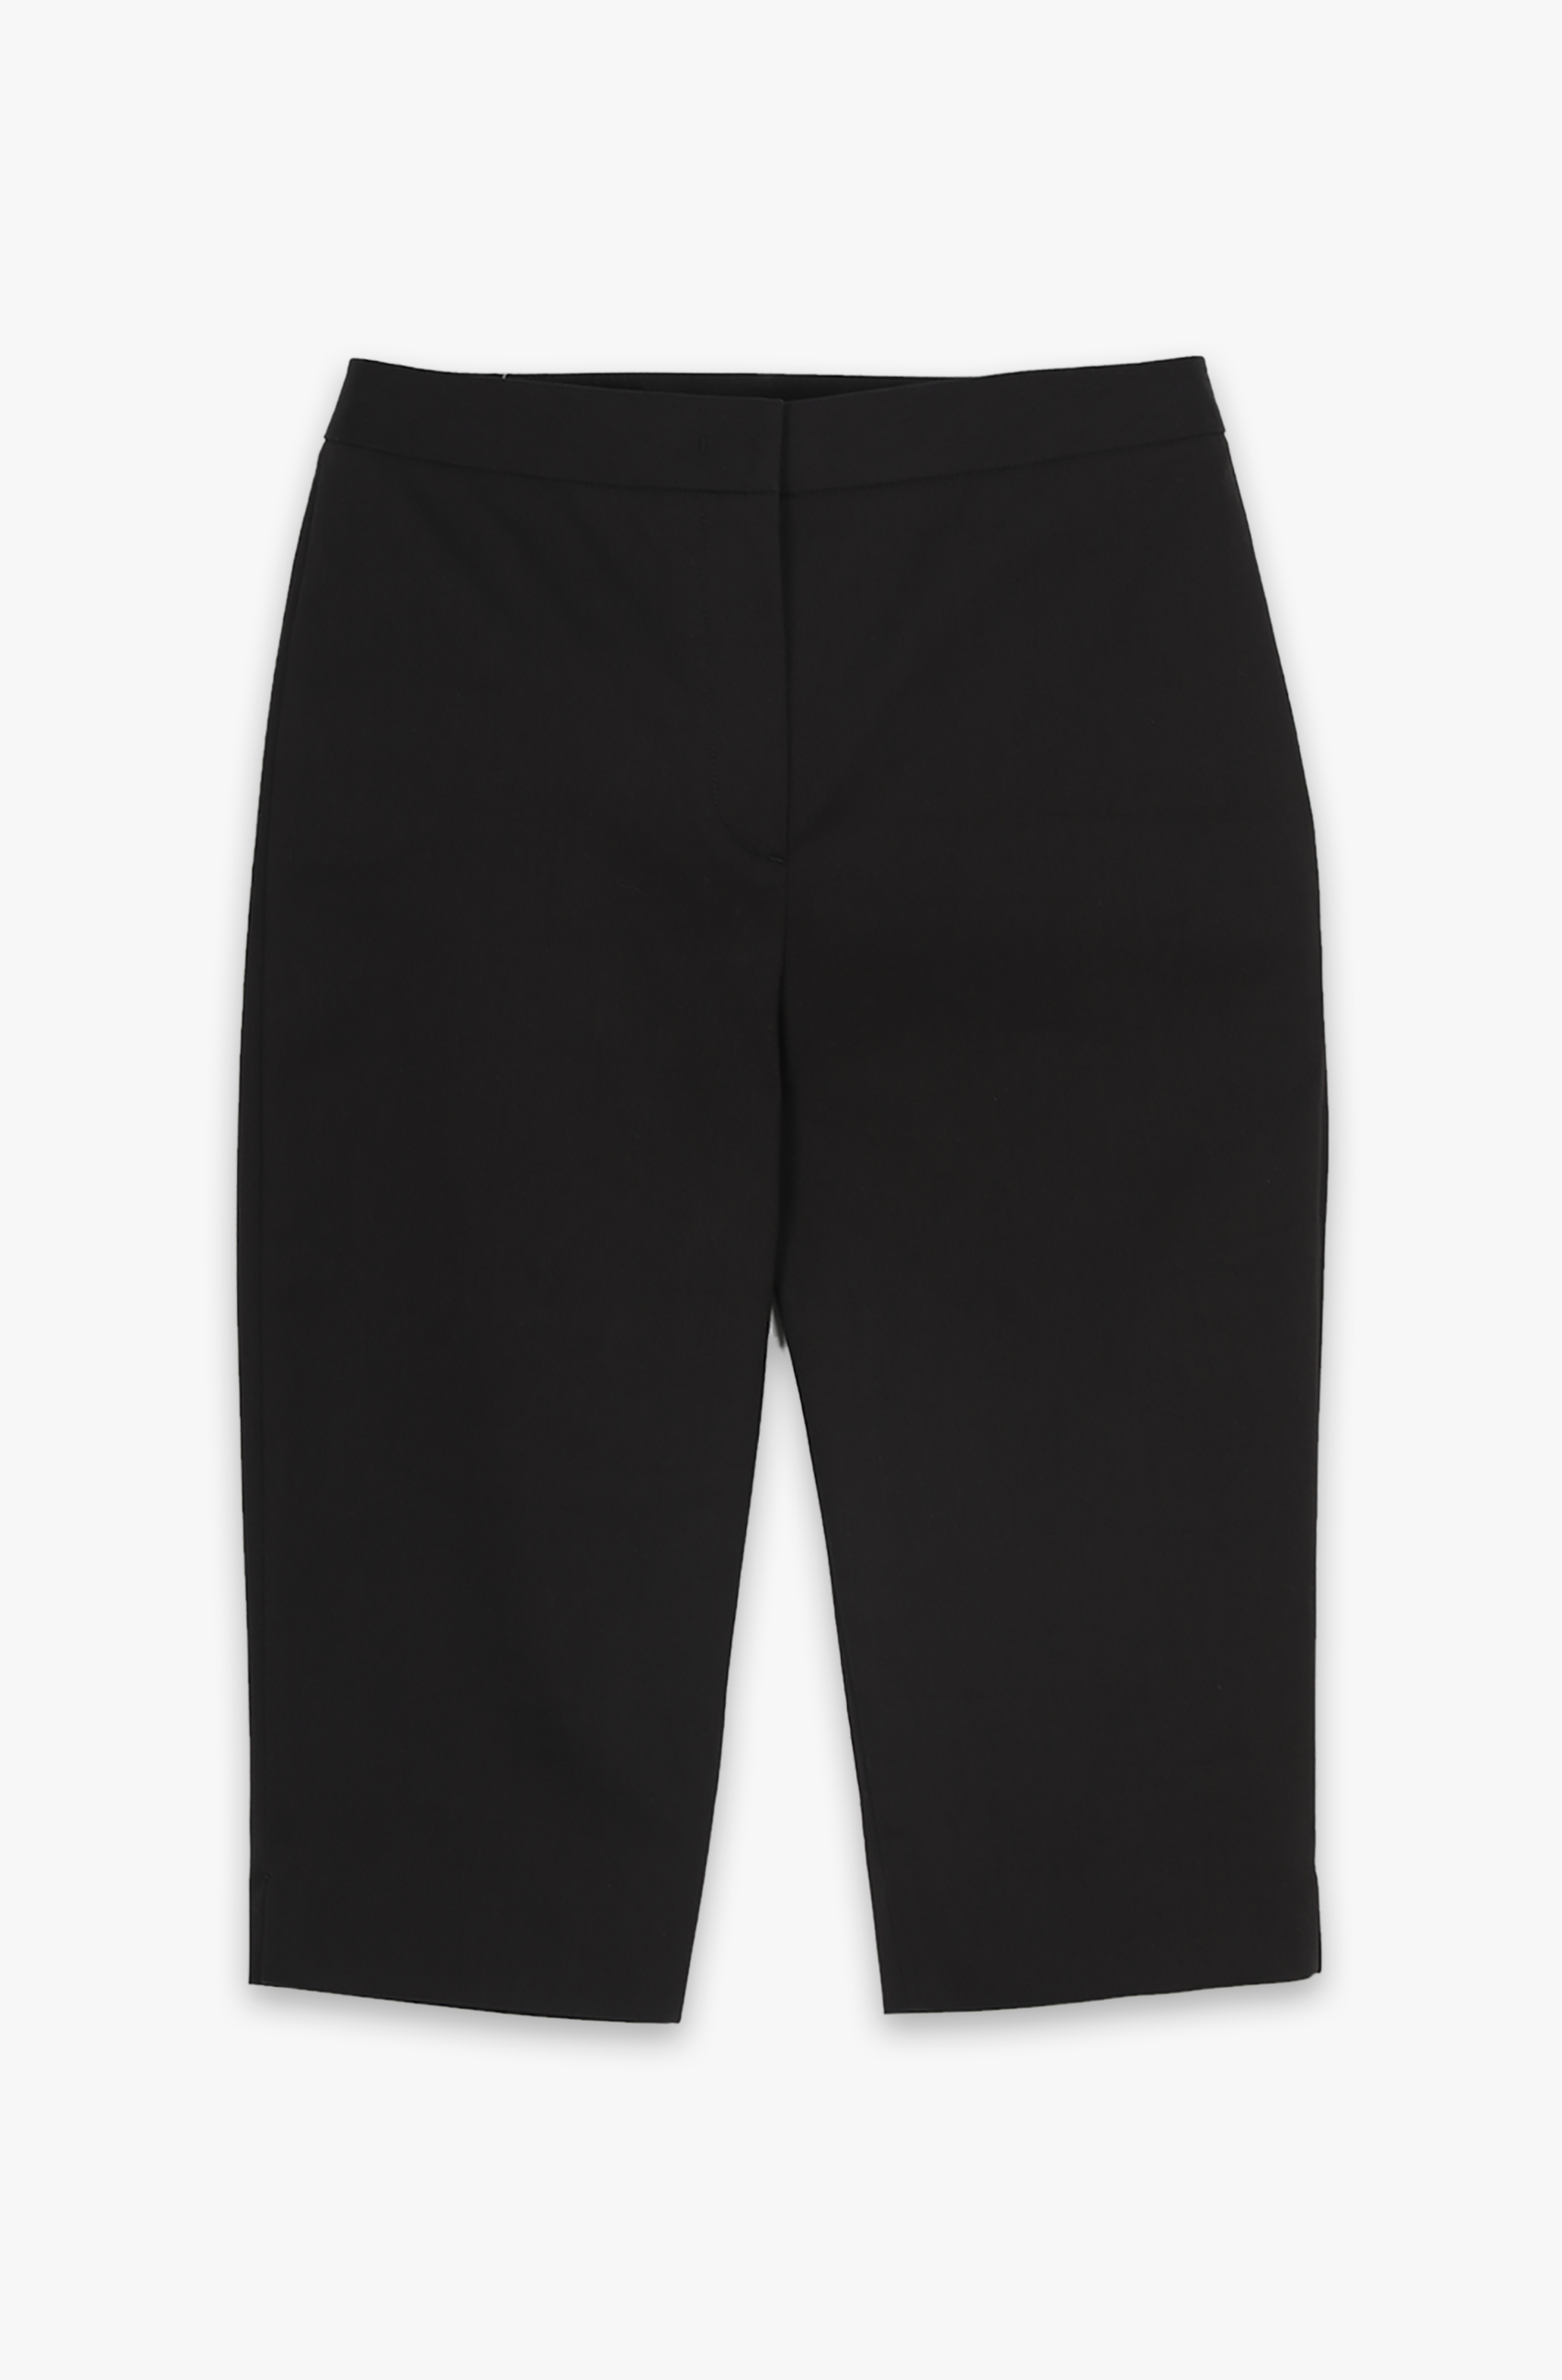 HIGH QUALITY LINE - FITTED MID-LENGTH PANTS (BLACK)